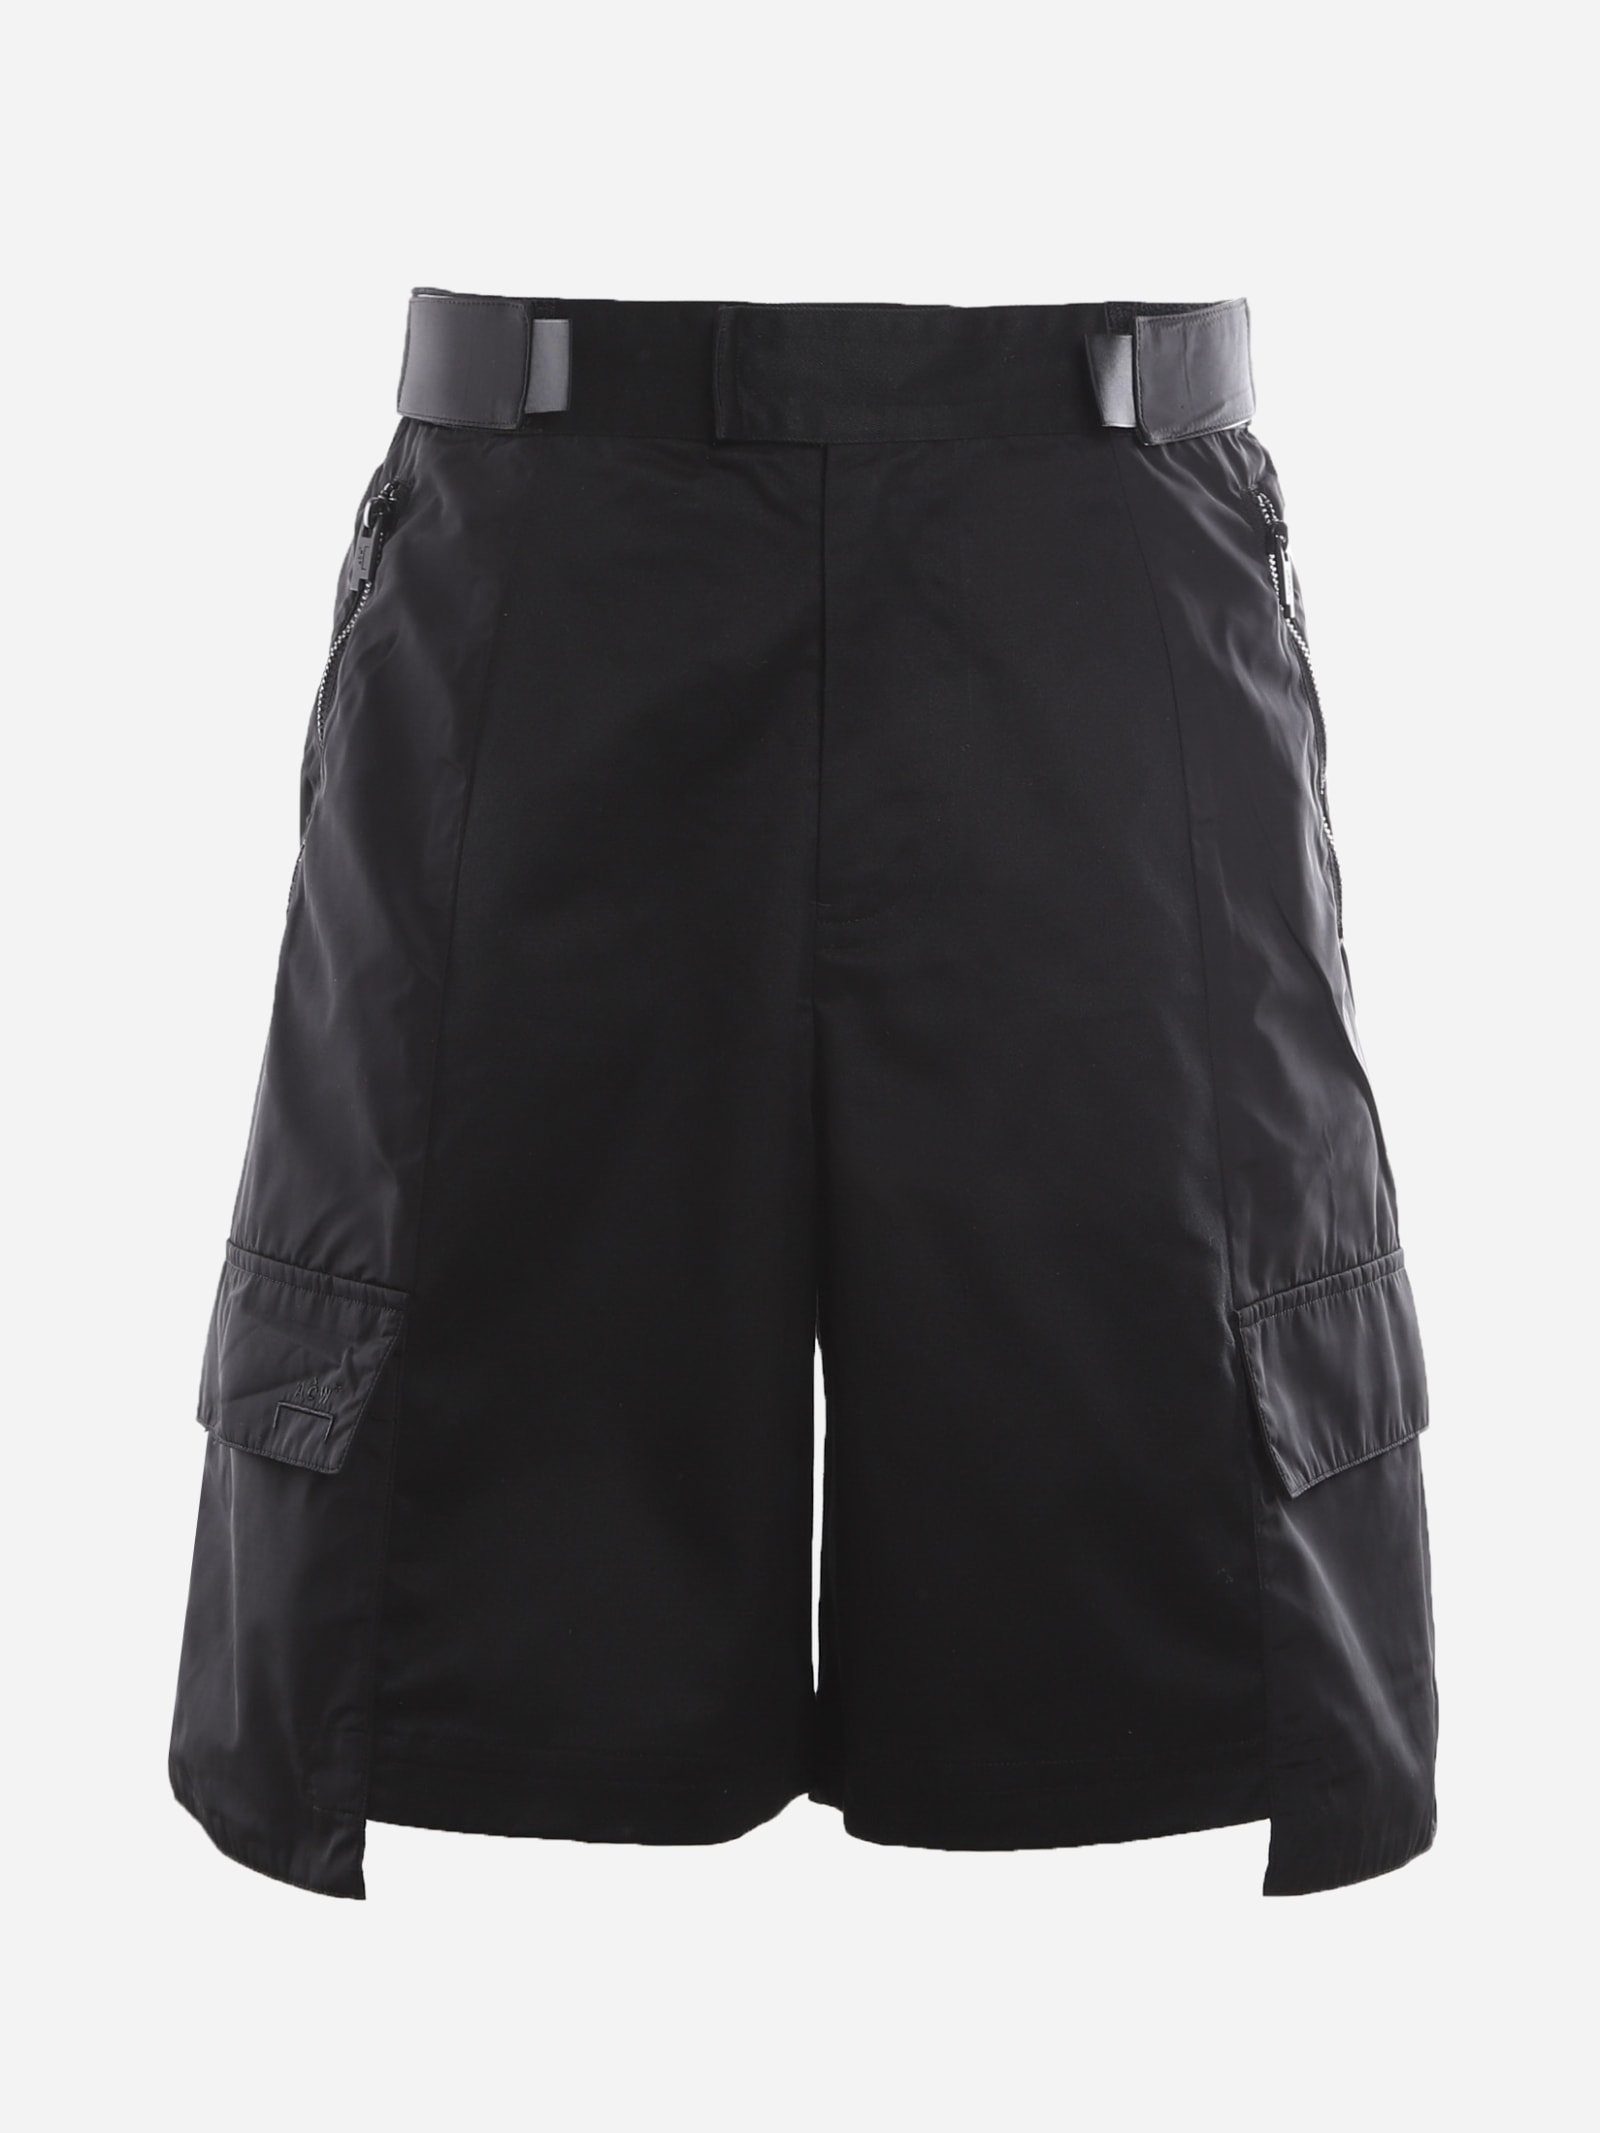 A-COLD-WALL Cotton Twill Cargo Shorts With Technical Fabric Inserts